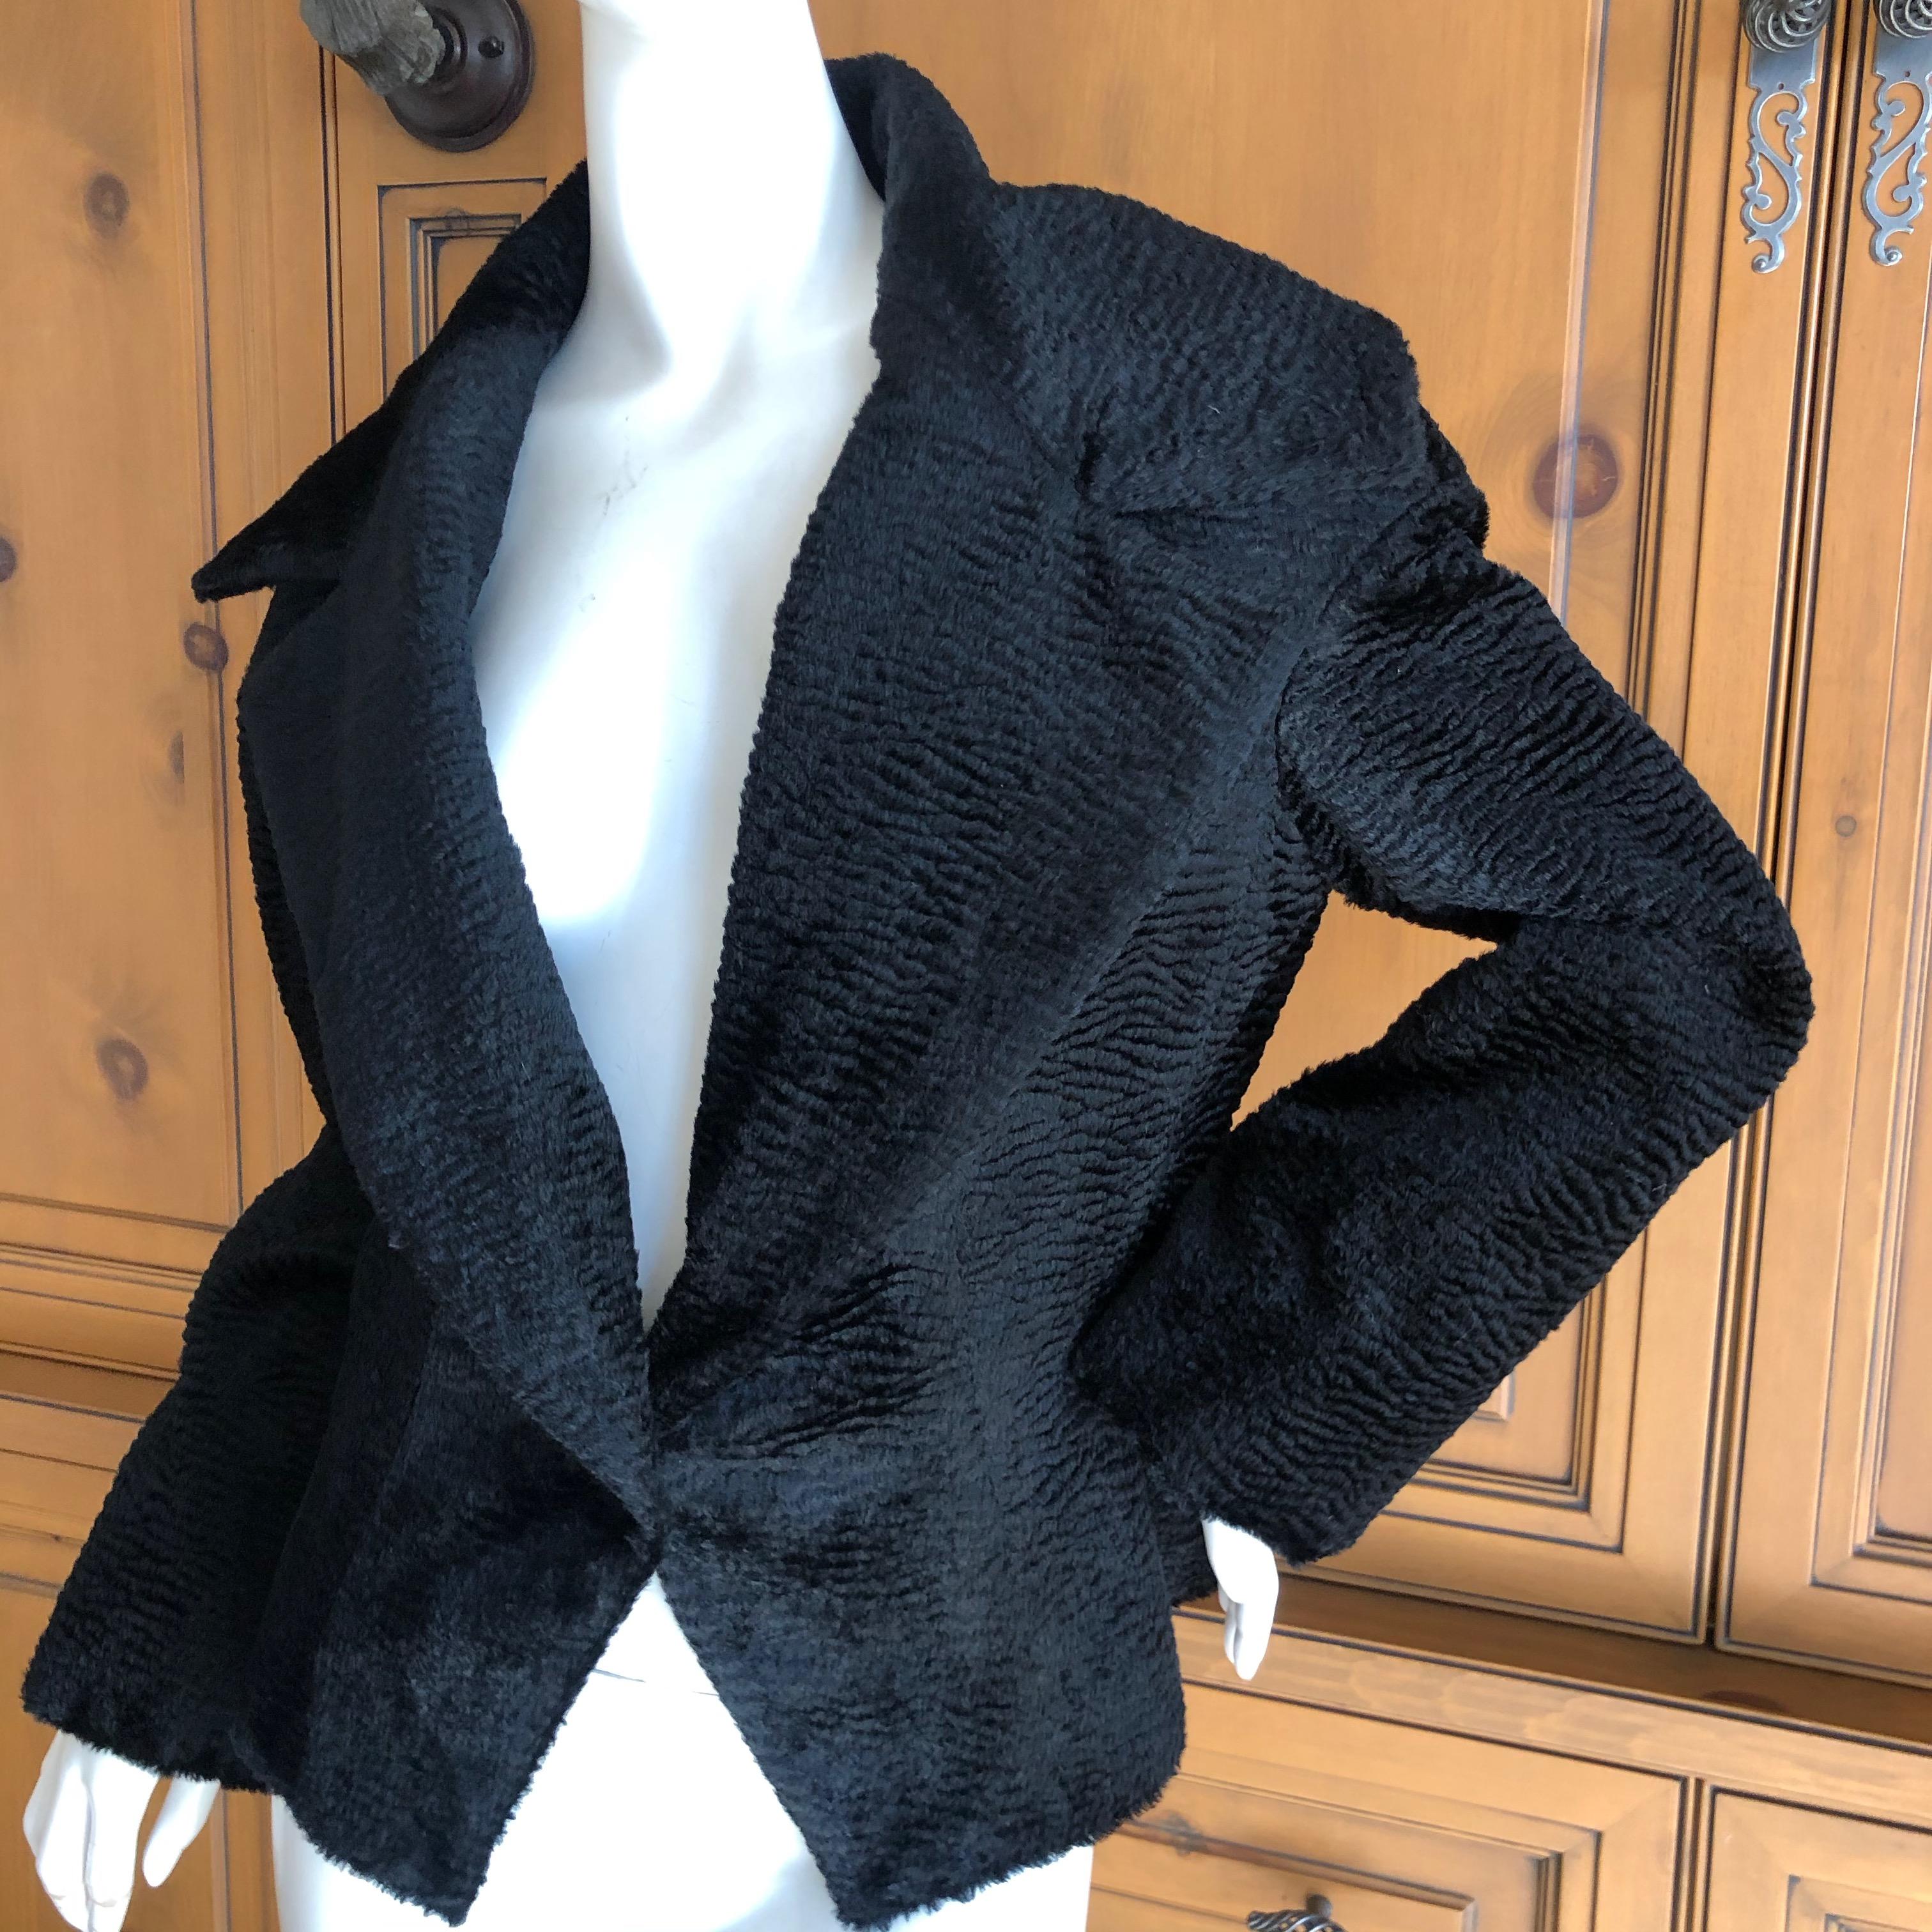 Givenchy Haute Couture Cropped Faux Broadtail Jacket
Haute couture, so no size tag
Bust 40